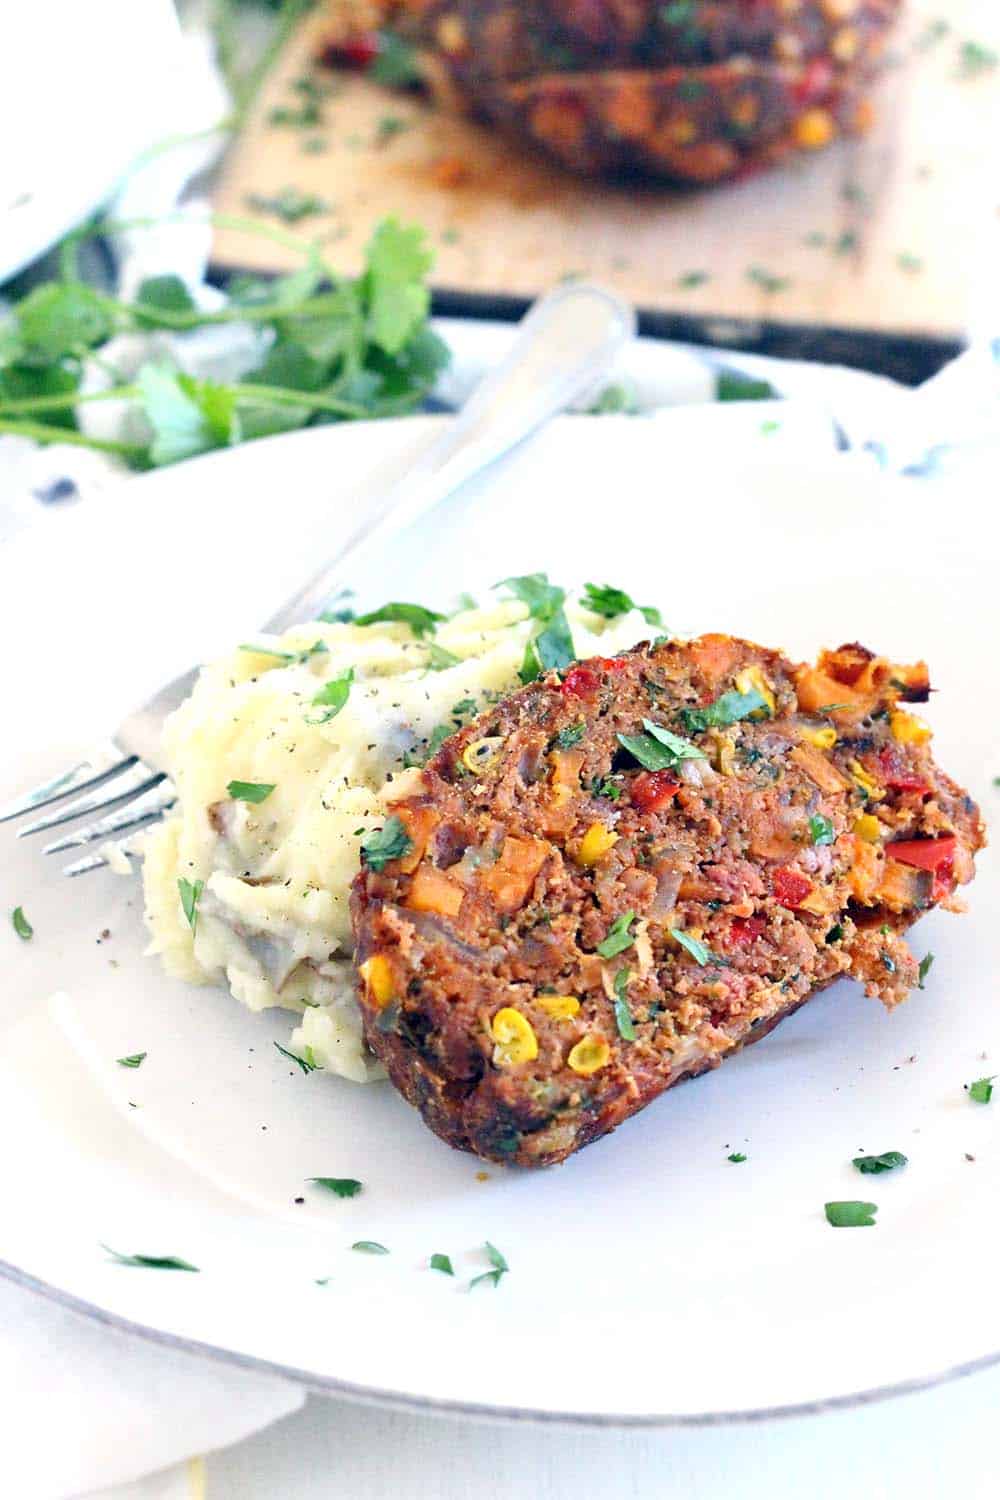 This Southwestern Meatloaf is a healthy, gluten-free option, PACKED with roasted veggies and bursting with Southwestern flavor. It's easy to make this ahead and freeze for later!